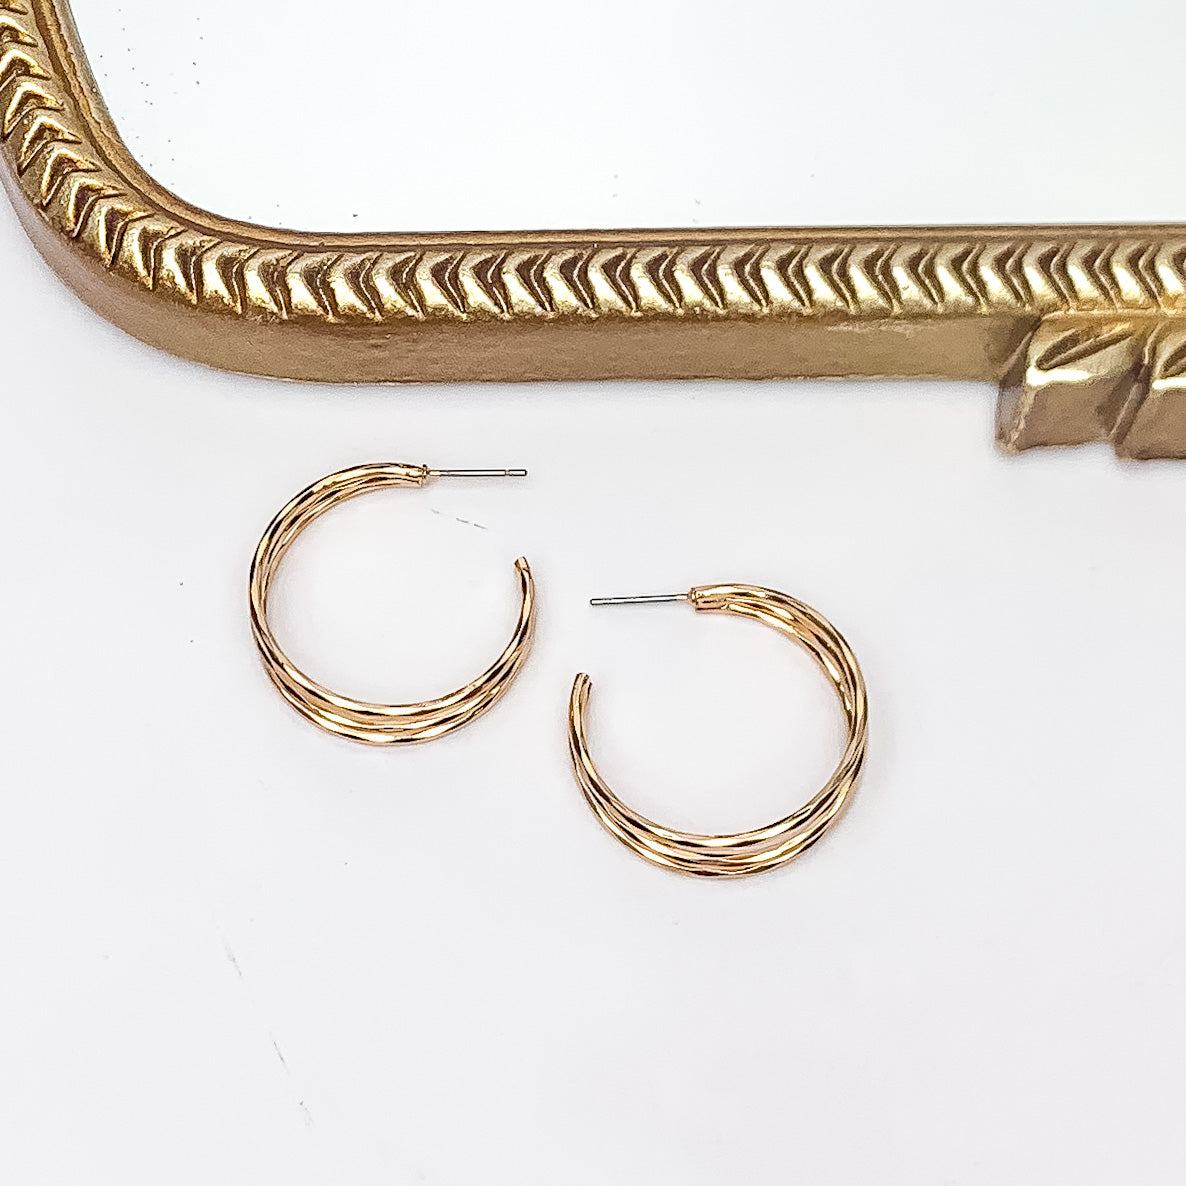 Good Karma Medium Triple Hoop Earrings in Gold Tone - Giddy Up Glamour Boutique